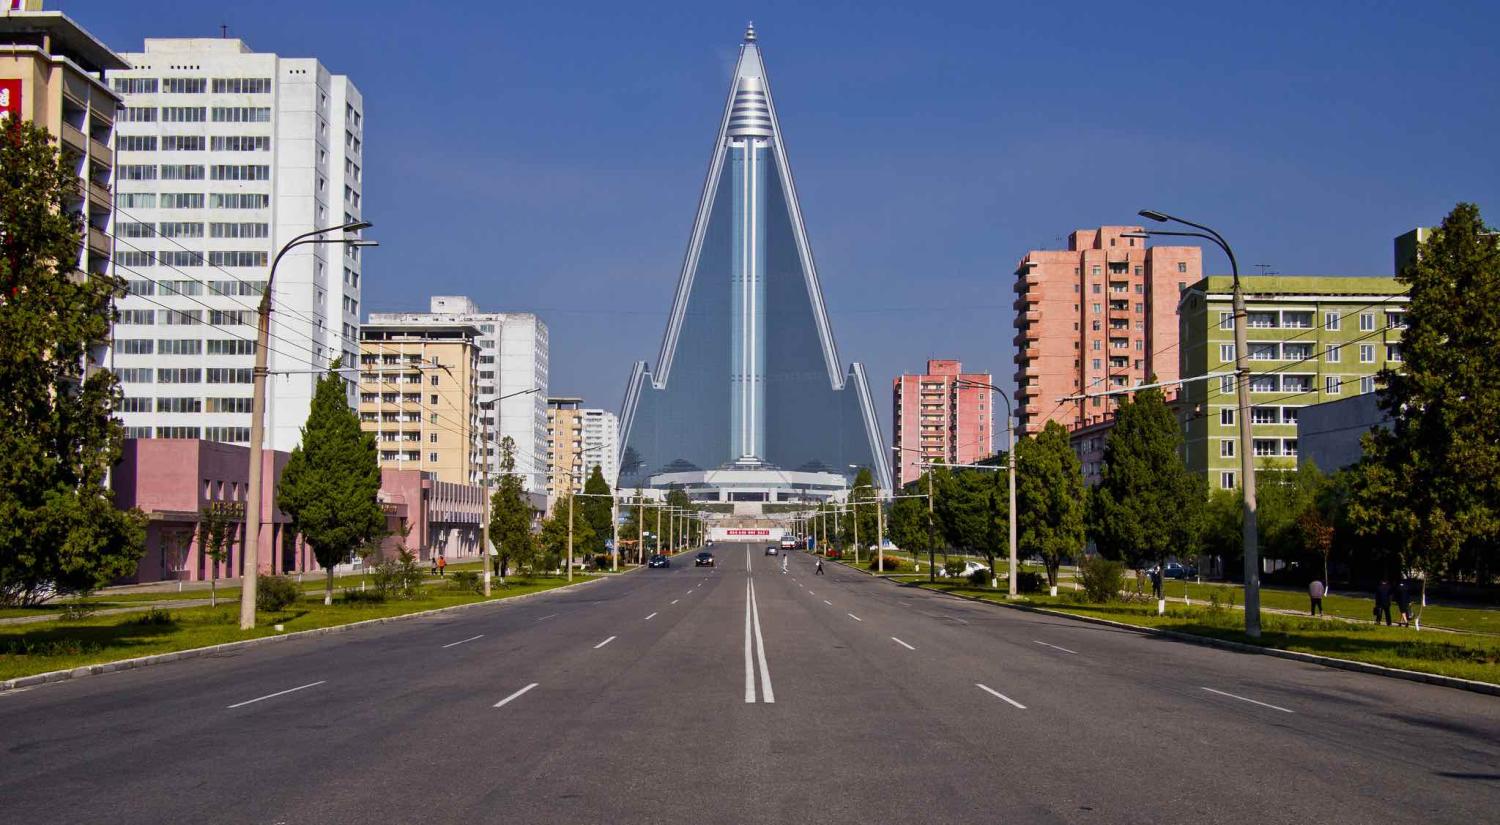 The Ryugyong Hotel in Pyongyang (Photo: Marcelo Druck/Flickr)